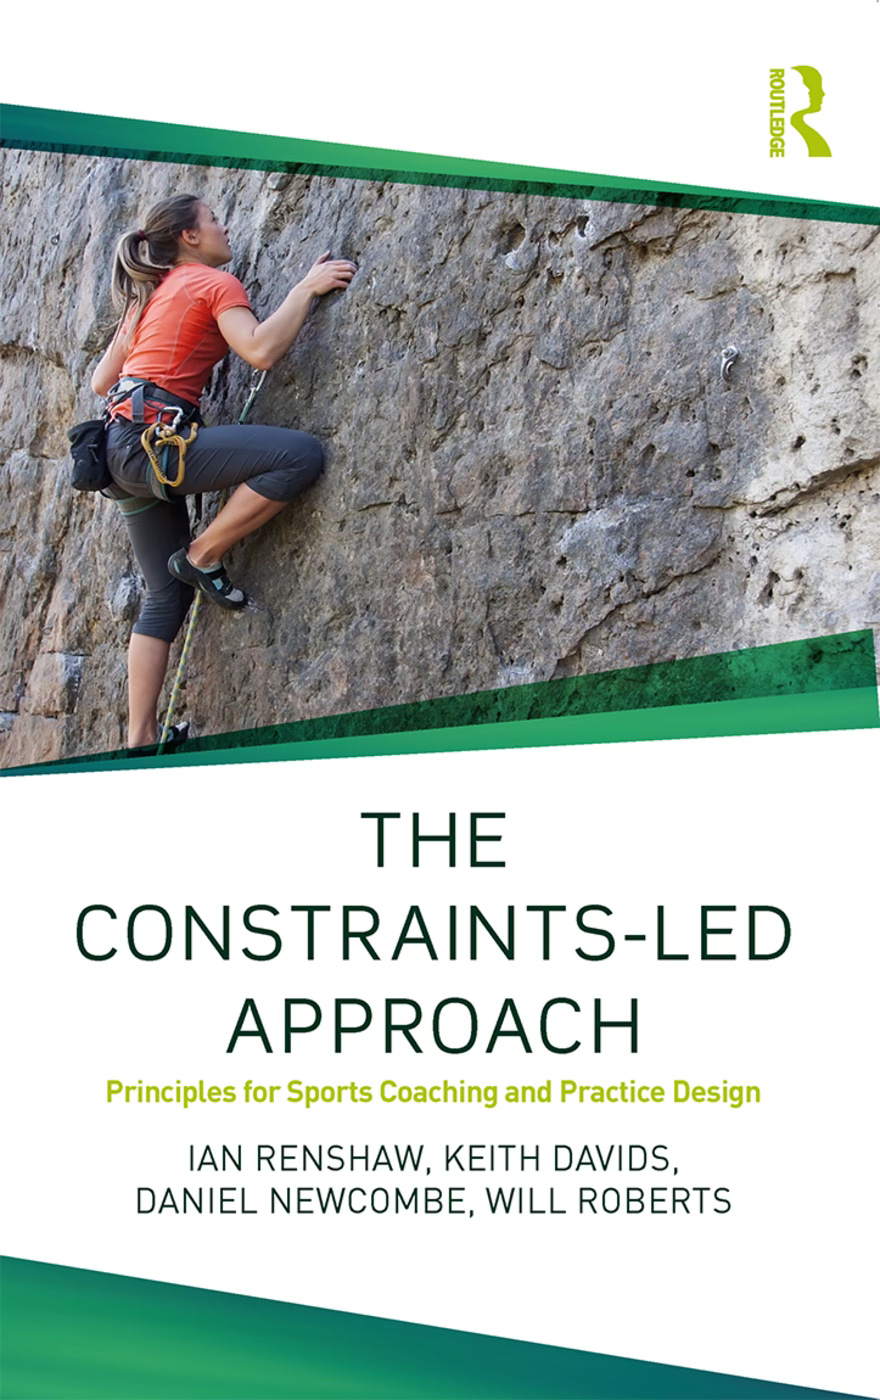 Front cover of the book “The Constraints-Led Approach” by Renshaw, Dvis, Newcombe, and Roberts